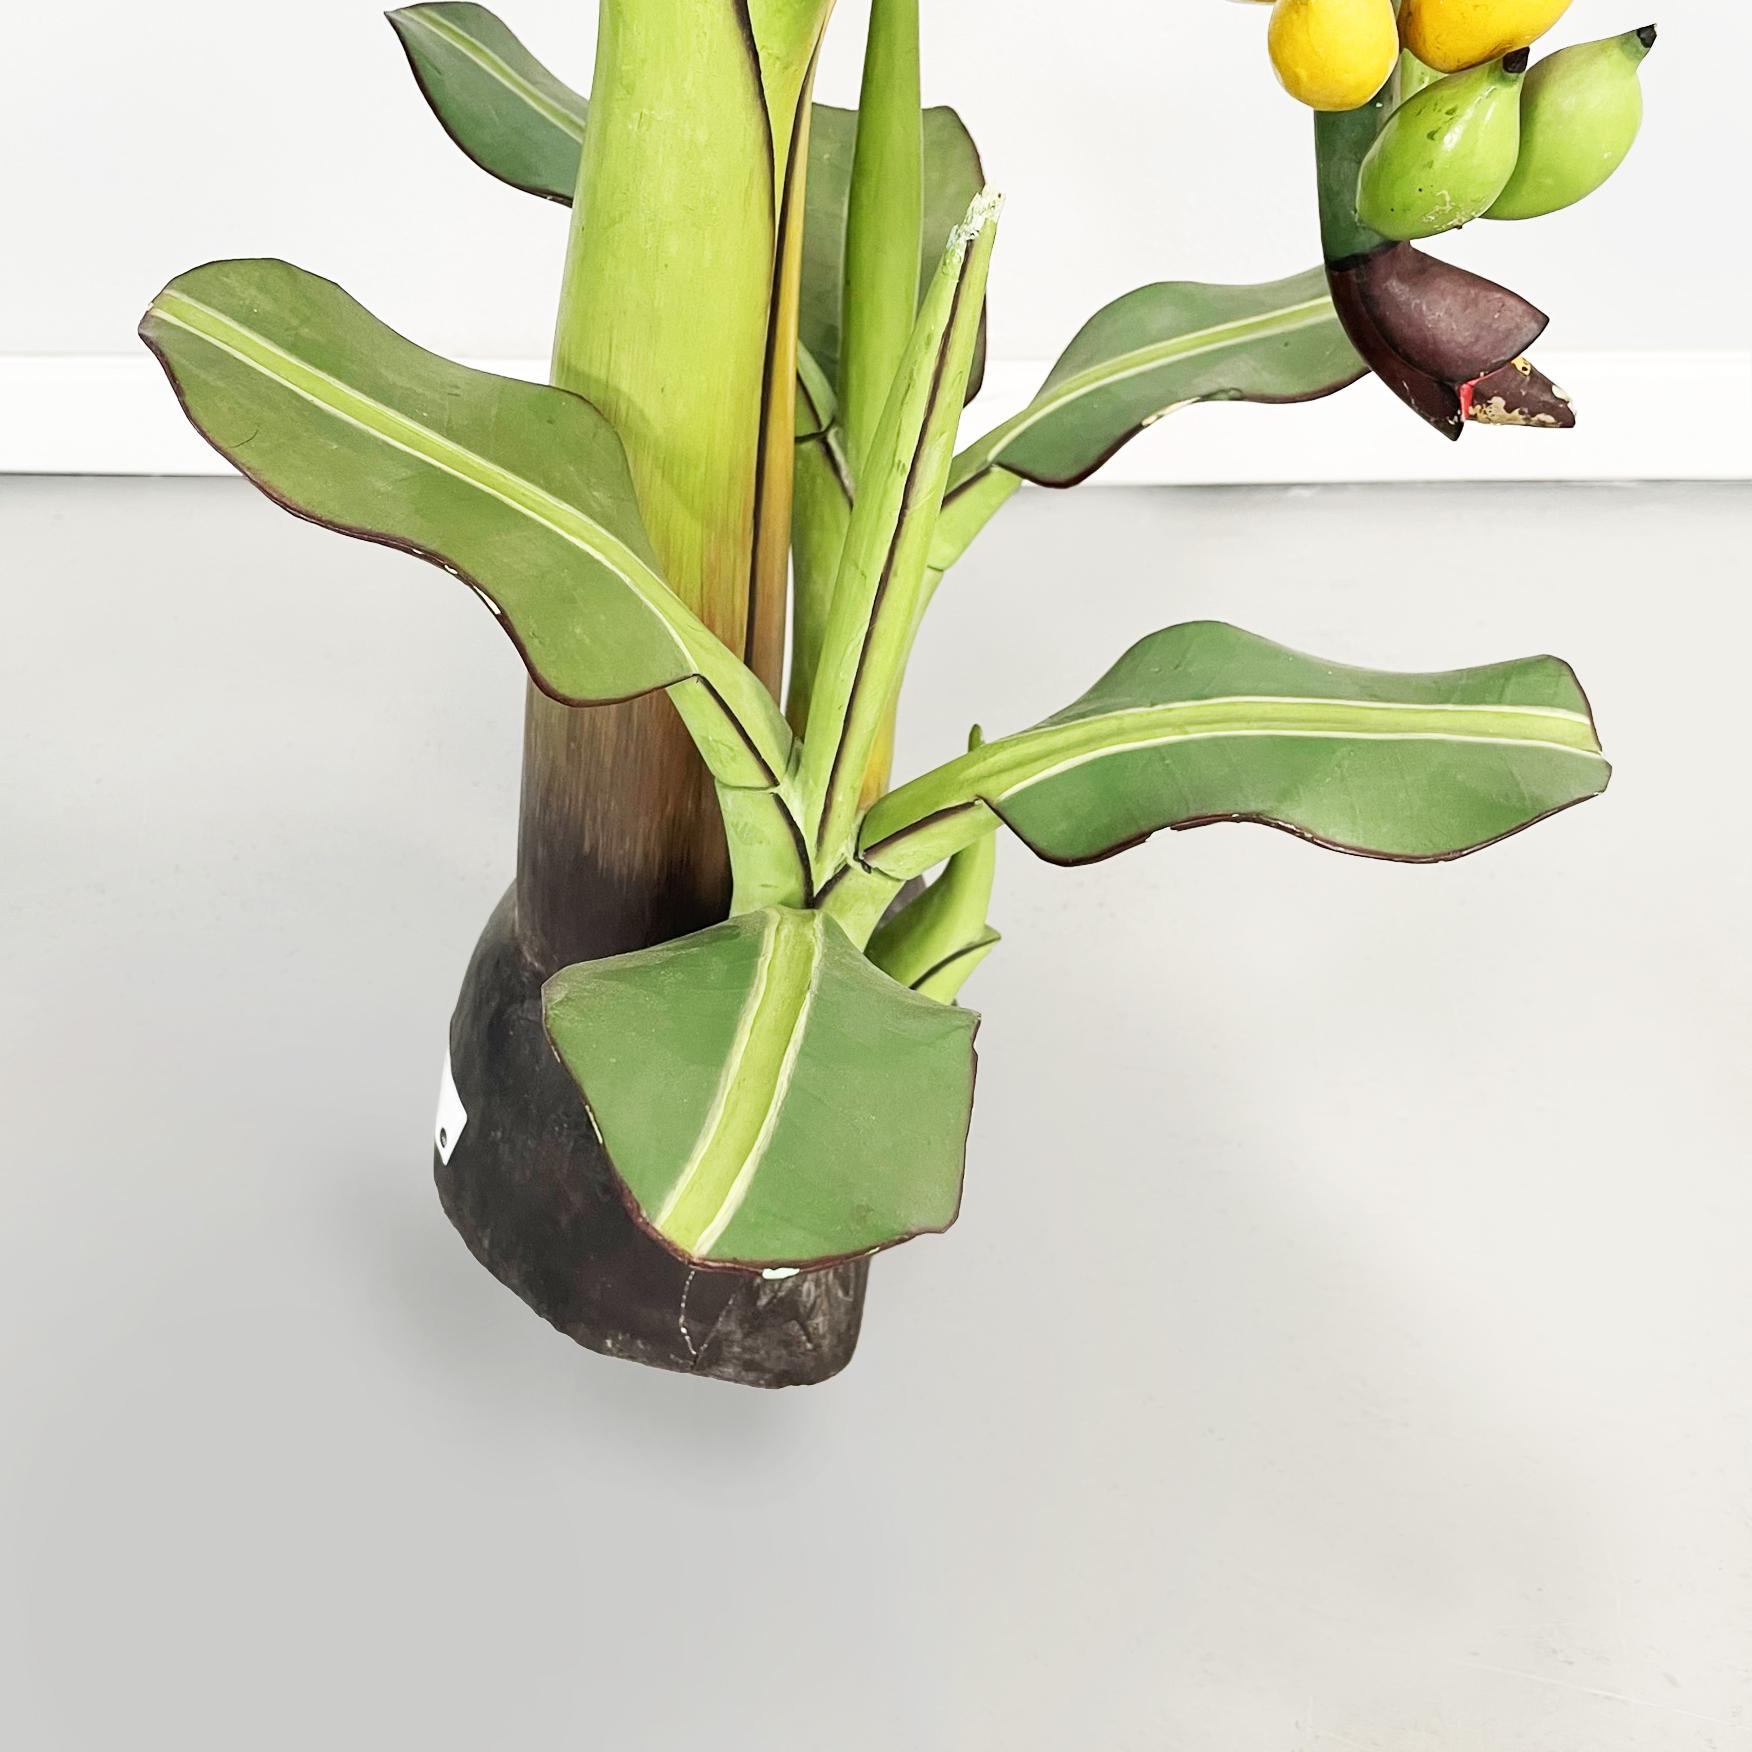 Italian Mid-Century Modern Wooden Sculpture of a Banana Plant, 1950s For Sale 6